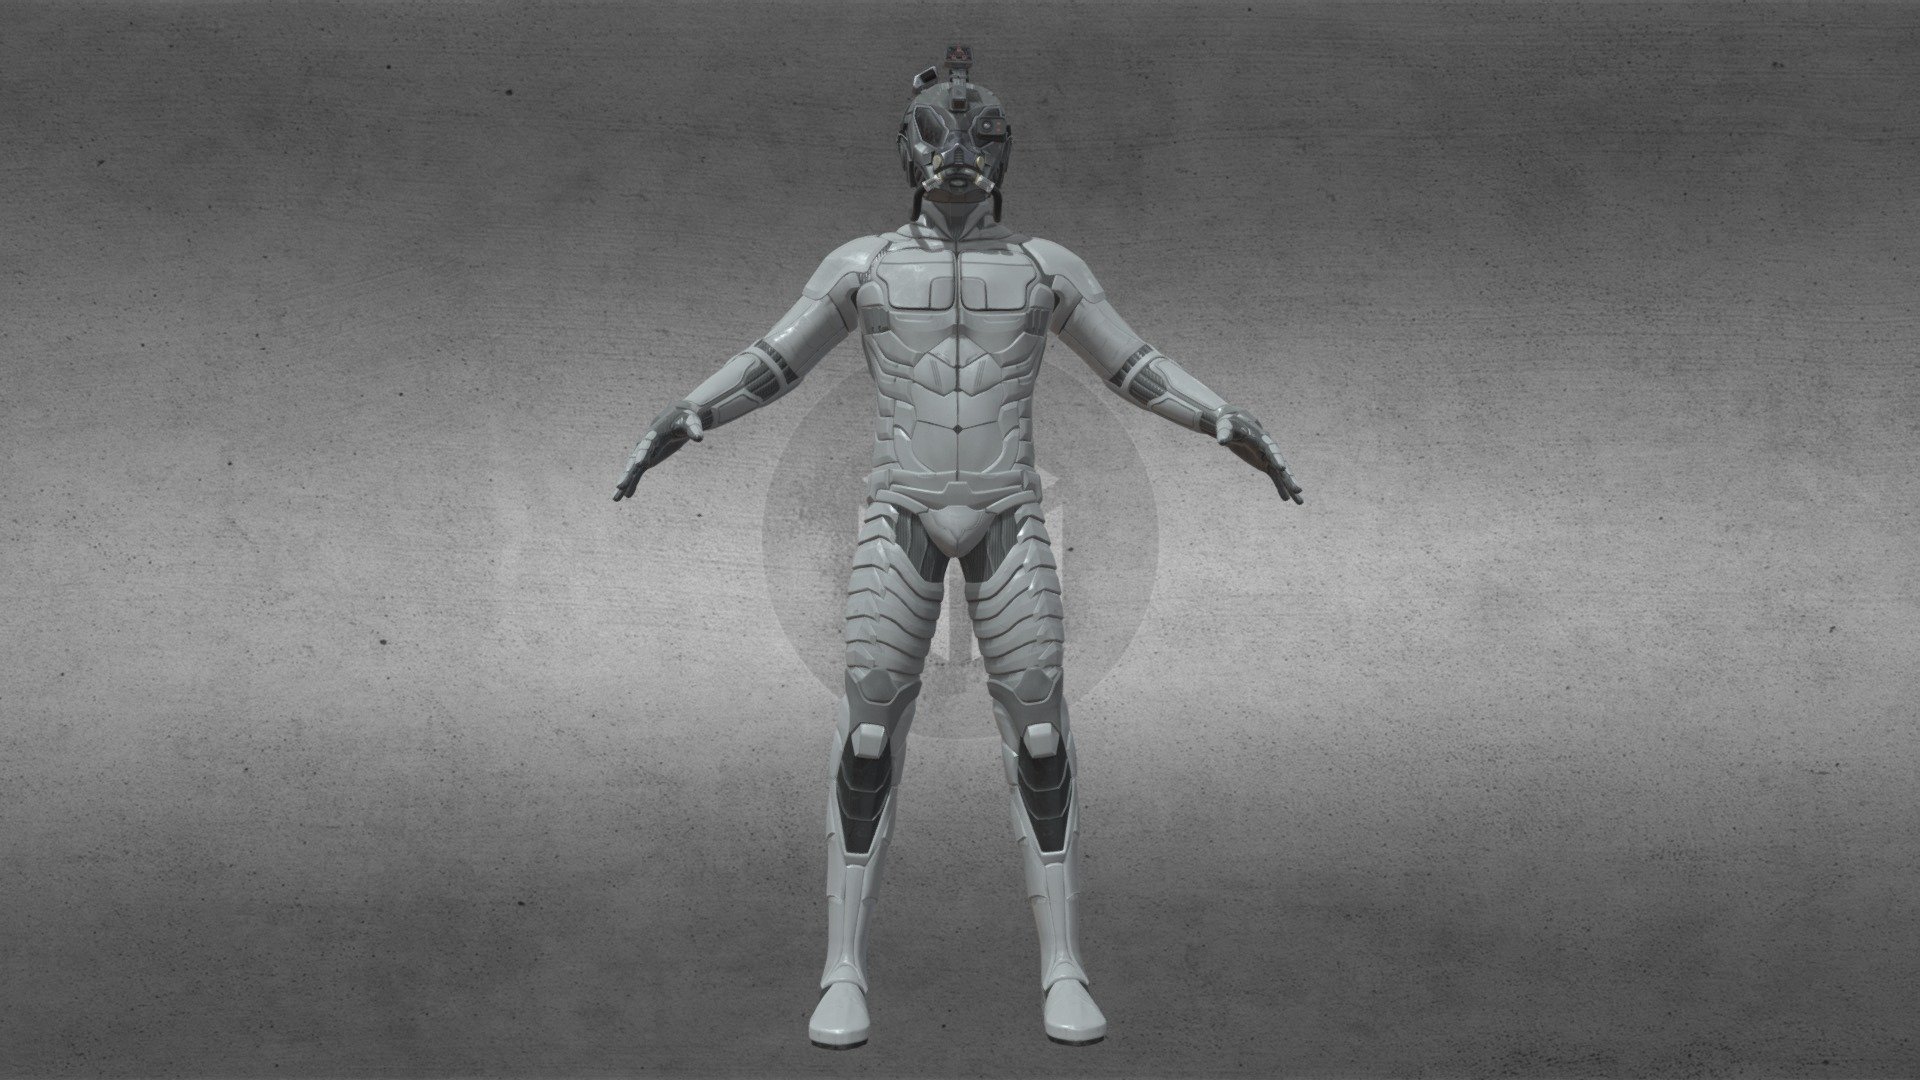 Protective suit.

Low poly model.

You get:

a set of textures for a low-poly model with a resolution of 4096x4096;

a set of baked cards for a substance painter, resolution 4096x4096;

high-poly model in .obj, .fbx, .stl formats;

low poly model in .obj, .fbx, .stl formats;

blend files that were used to create the models;

3D model file in .max format 3d model